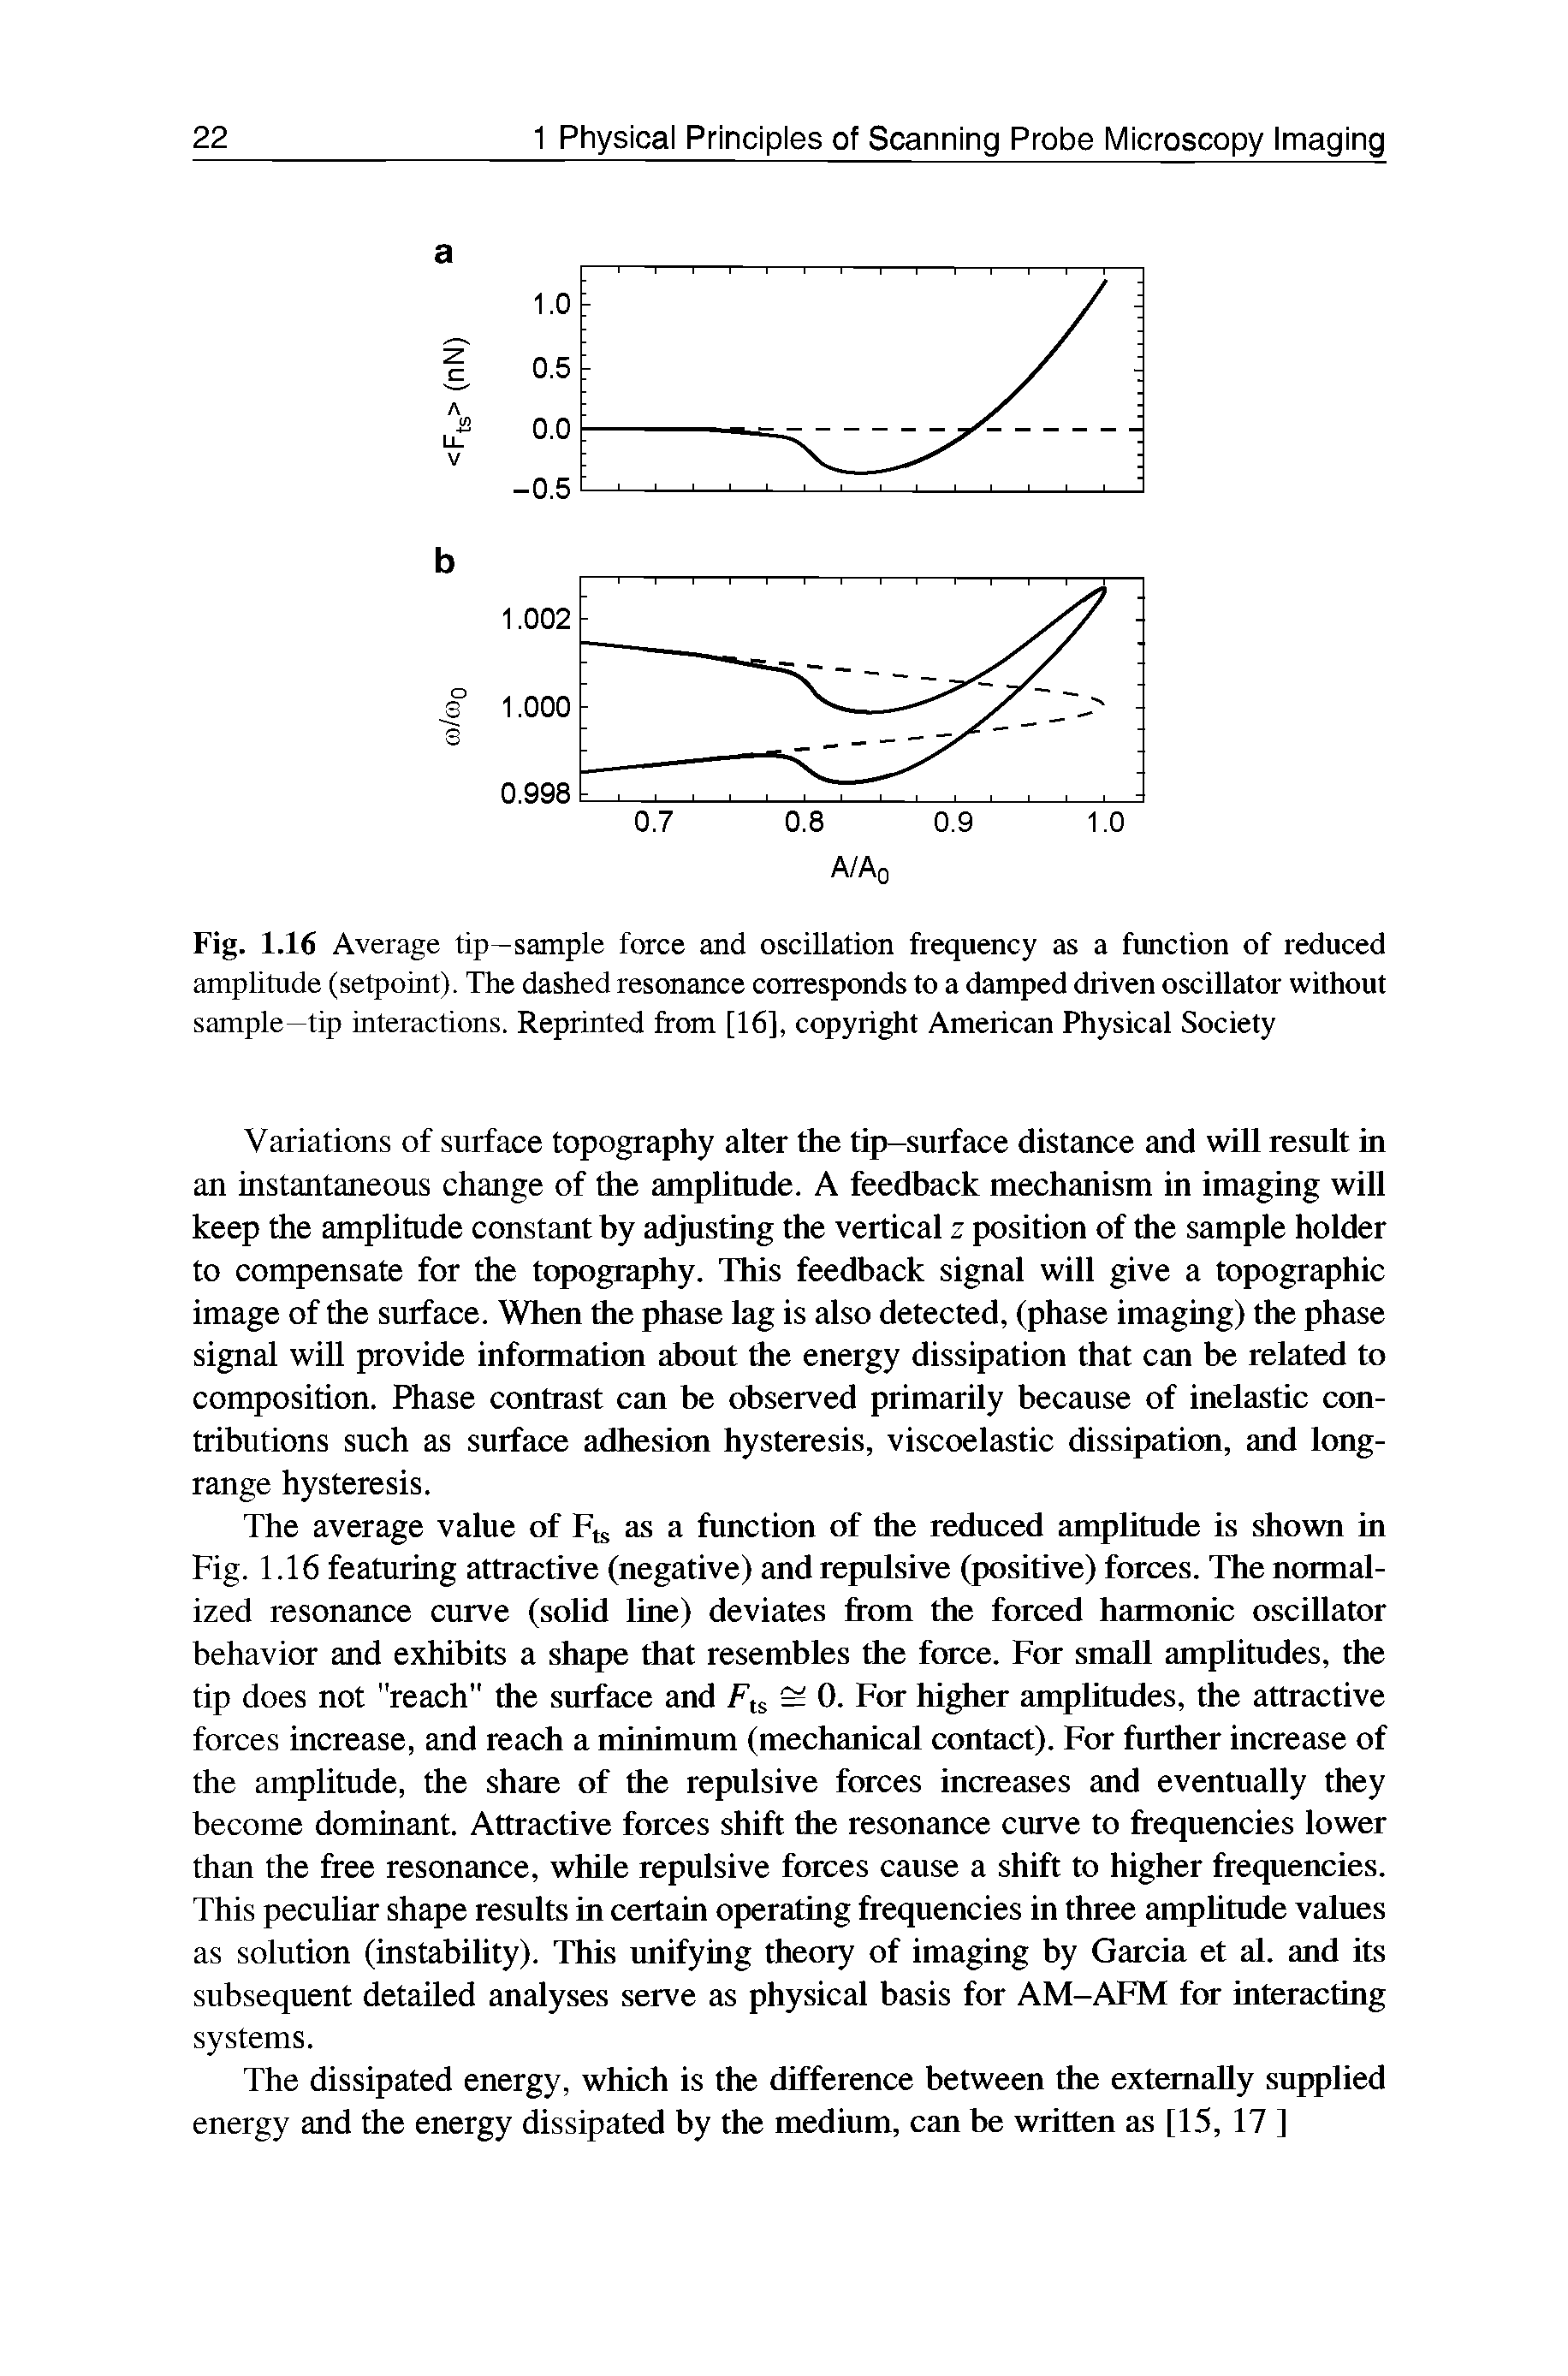 Fig. 1.16 Average tip—sample force and oscillation frequency as a function of reduced amplitude (setpoint). The dashed resonance corresponds to a damped driven oscillator without sample—tip interactions. Reprinted from [16], copyright American Physical Society...